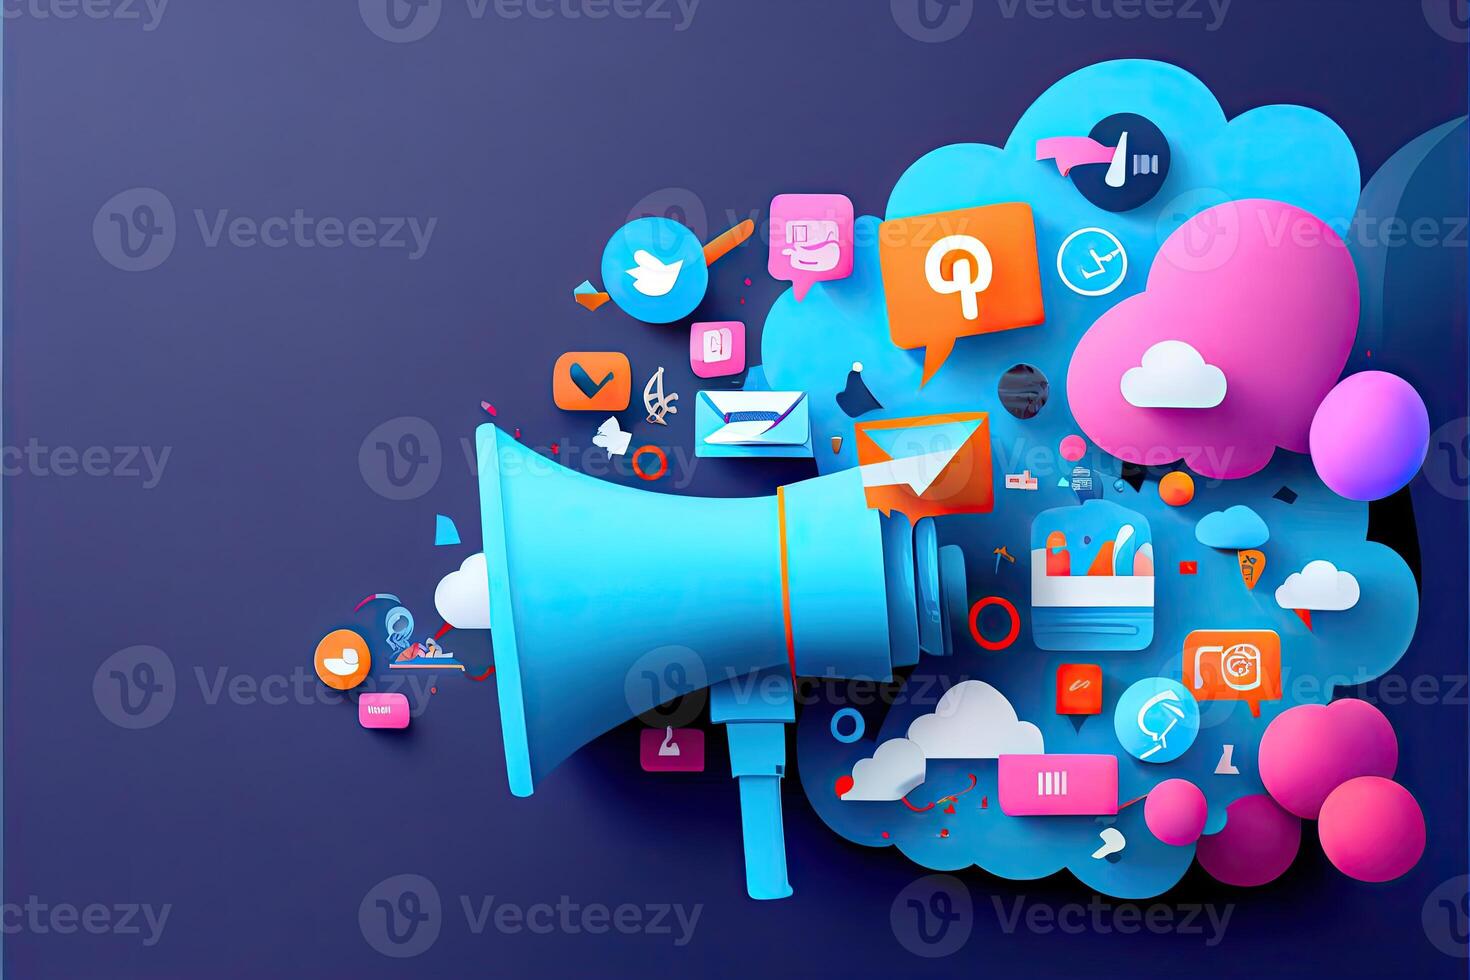 web site article image, material design, dark blue gradient background, megaphone in the left side of image, social networks icon photo